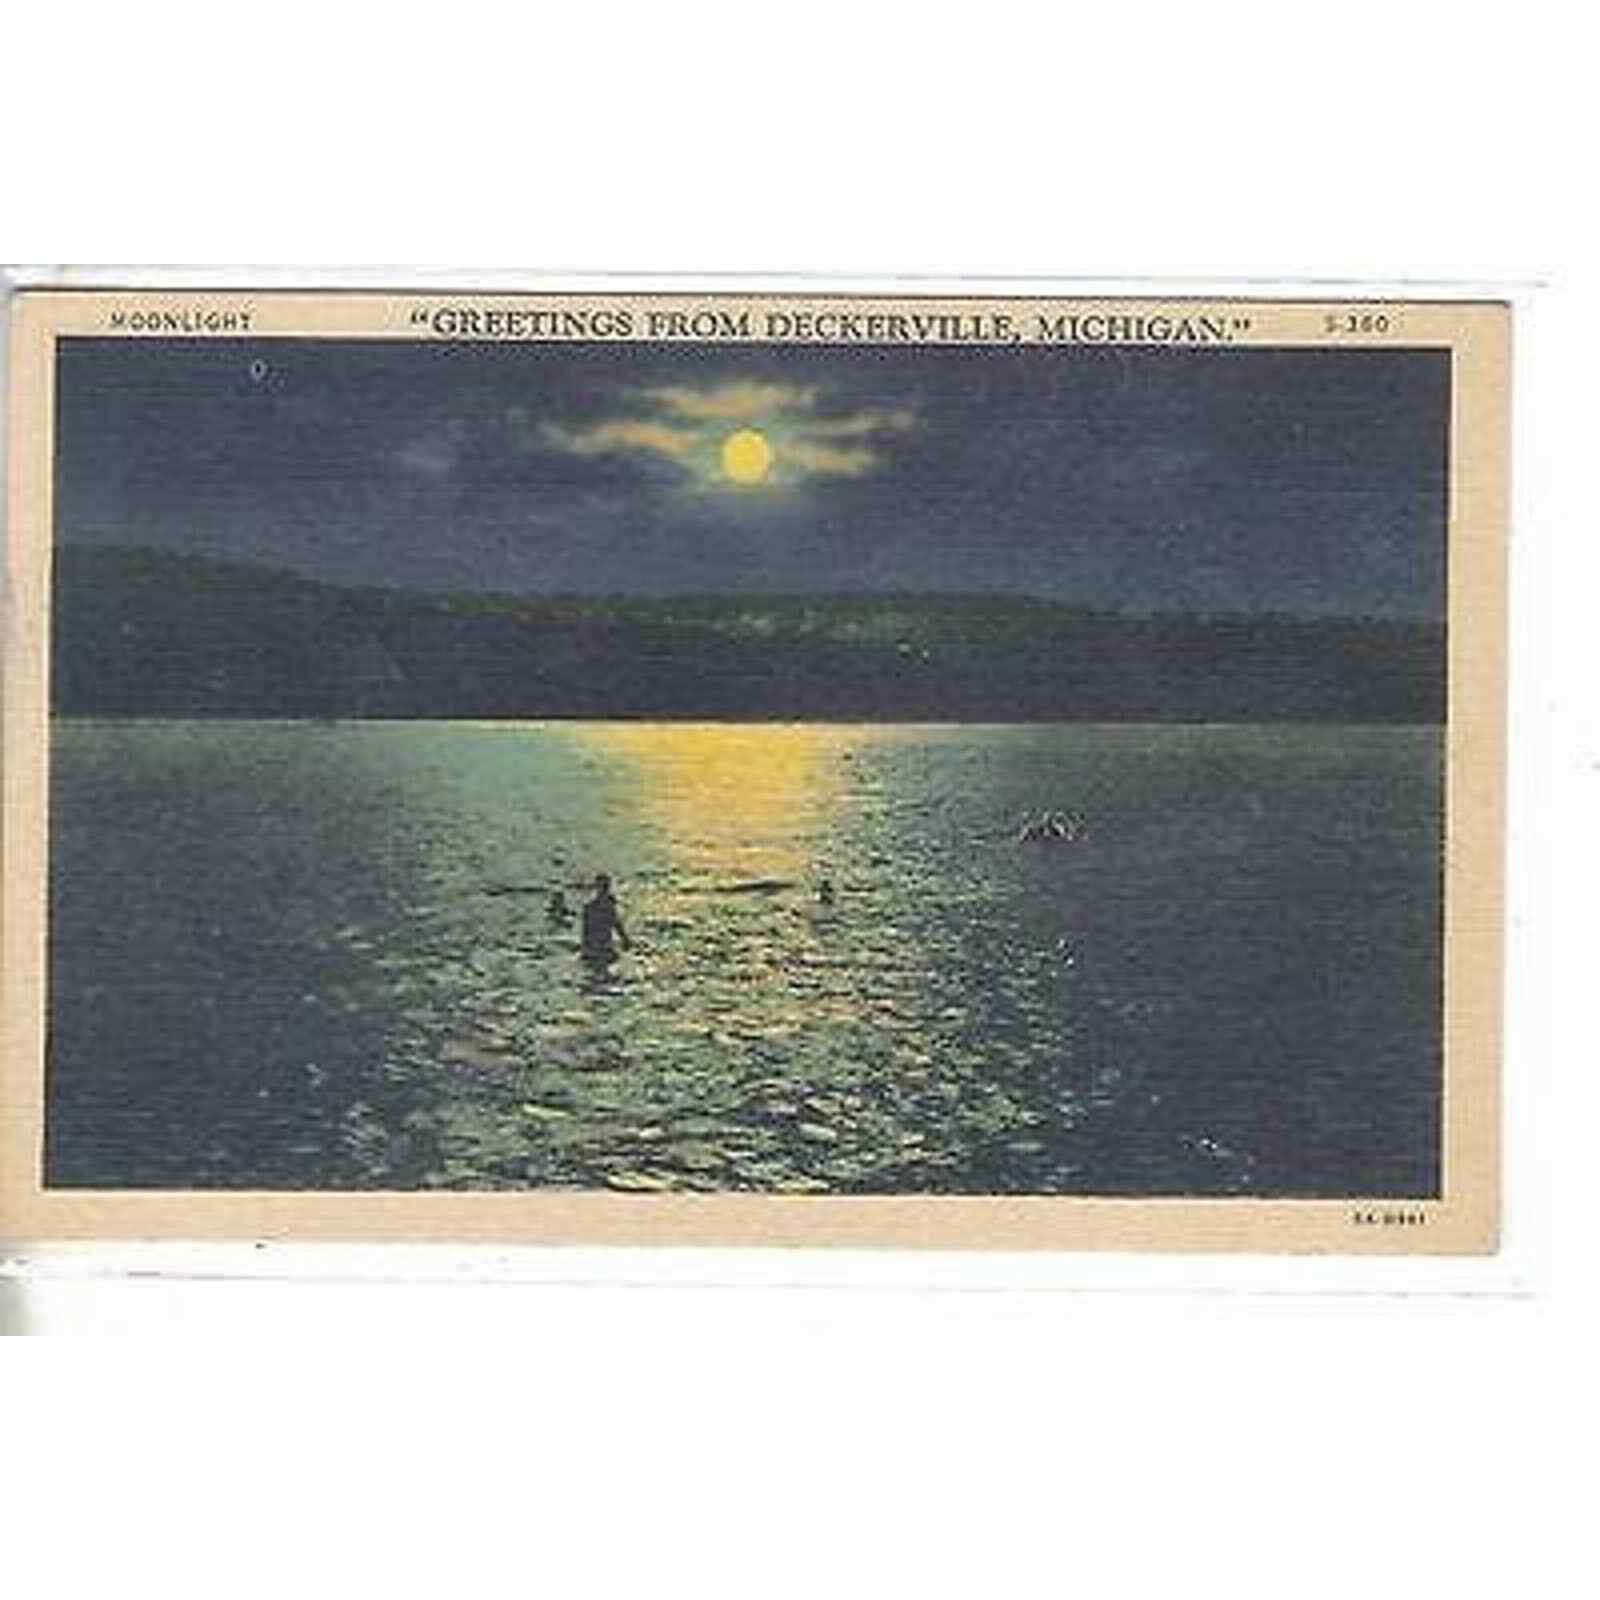 Greetings from Deckerville,Michigan Linen Post Card